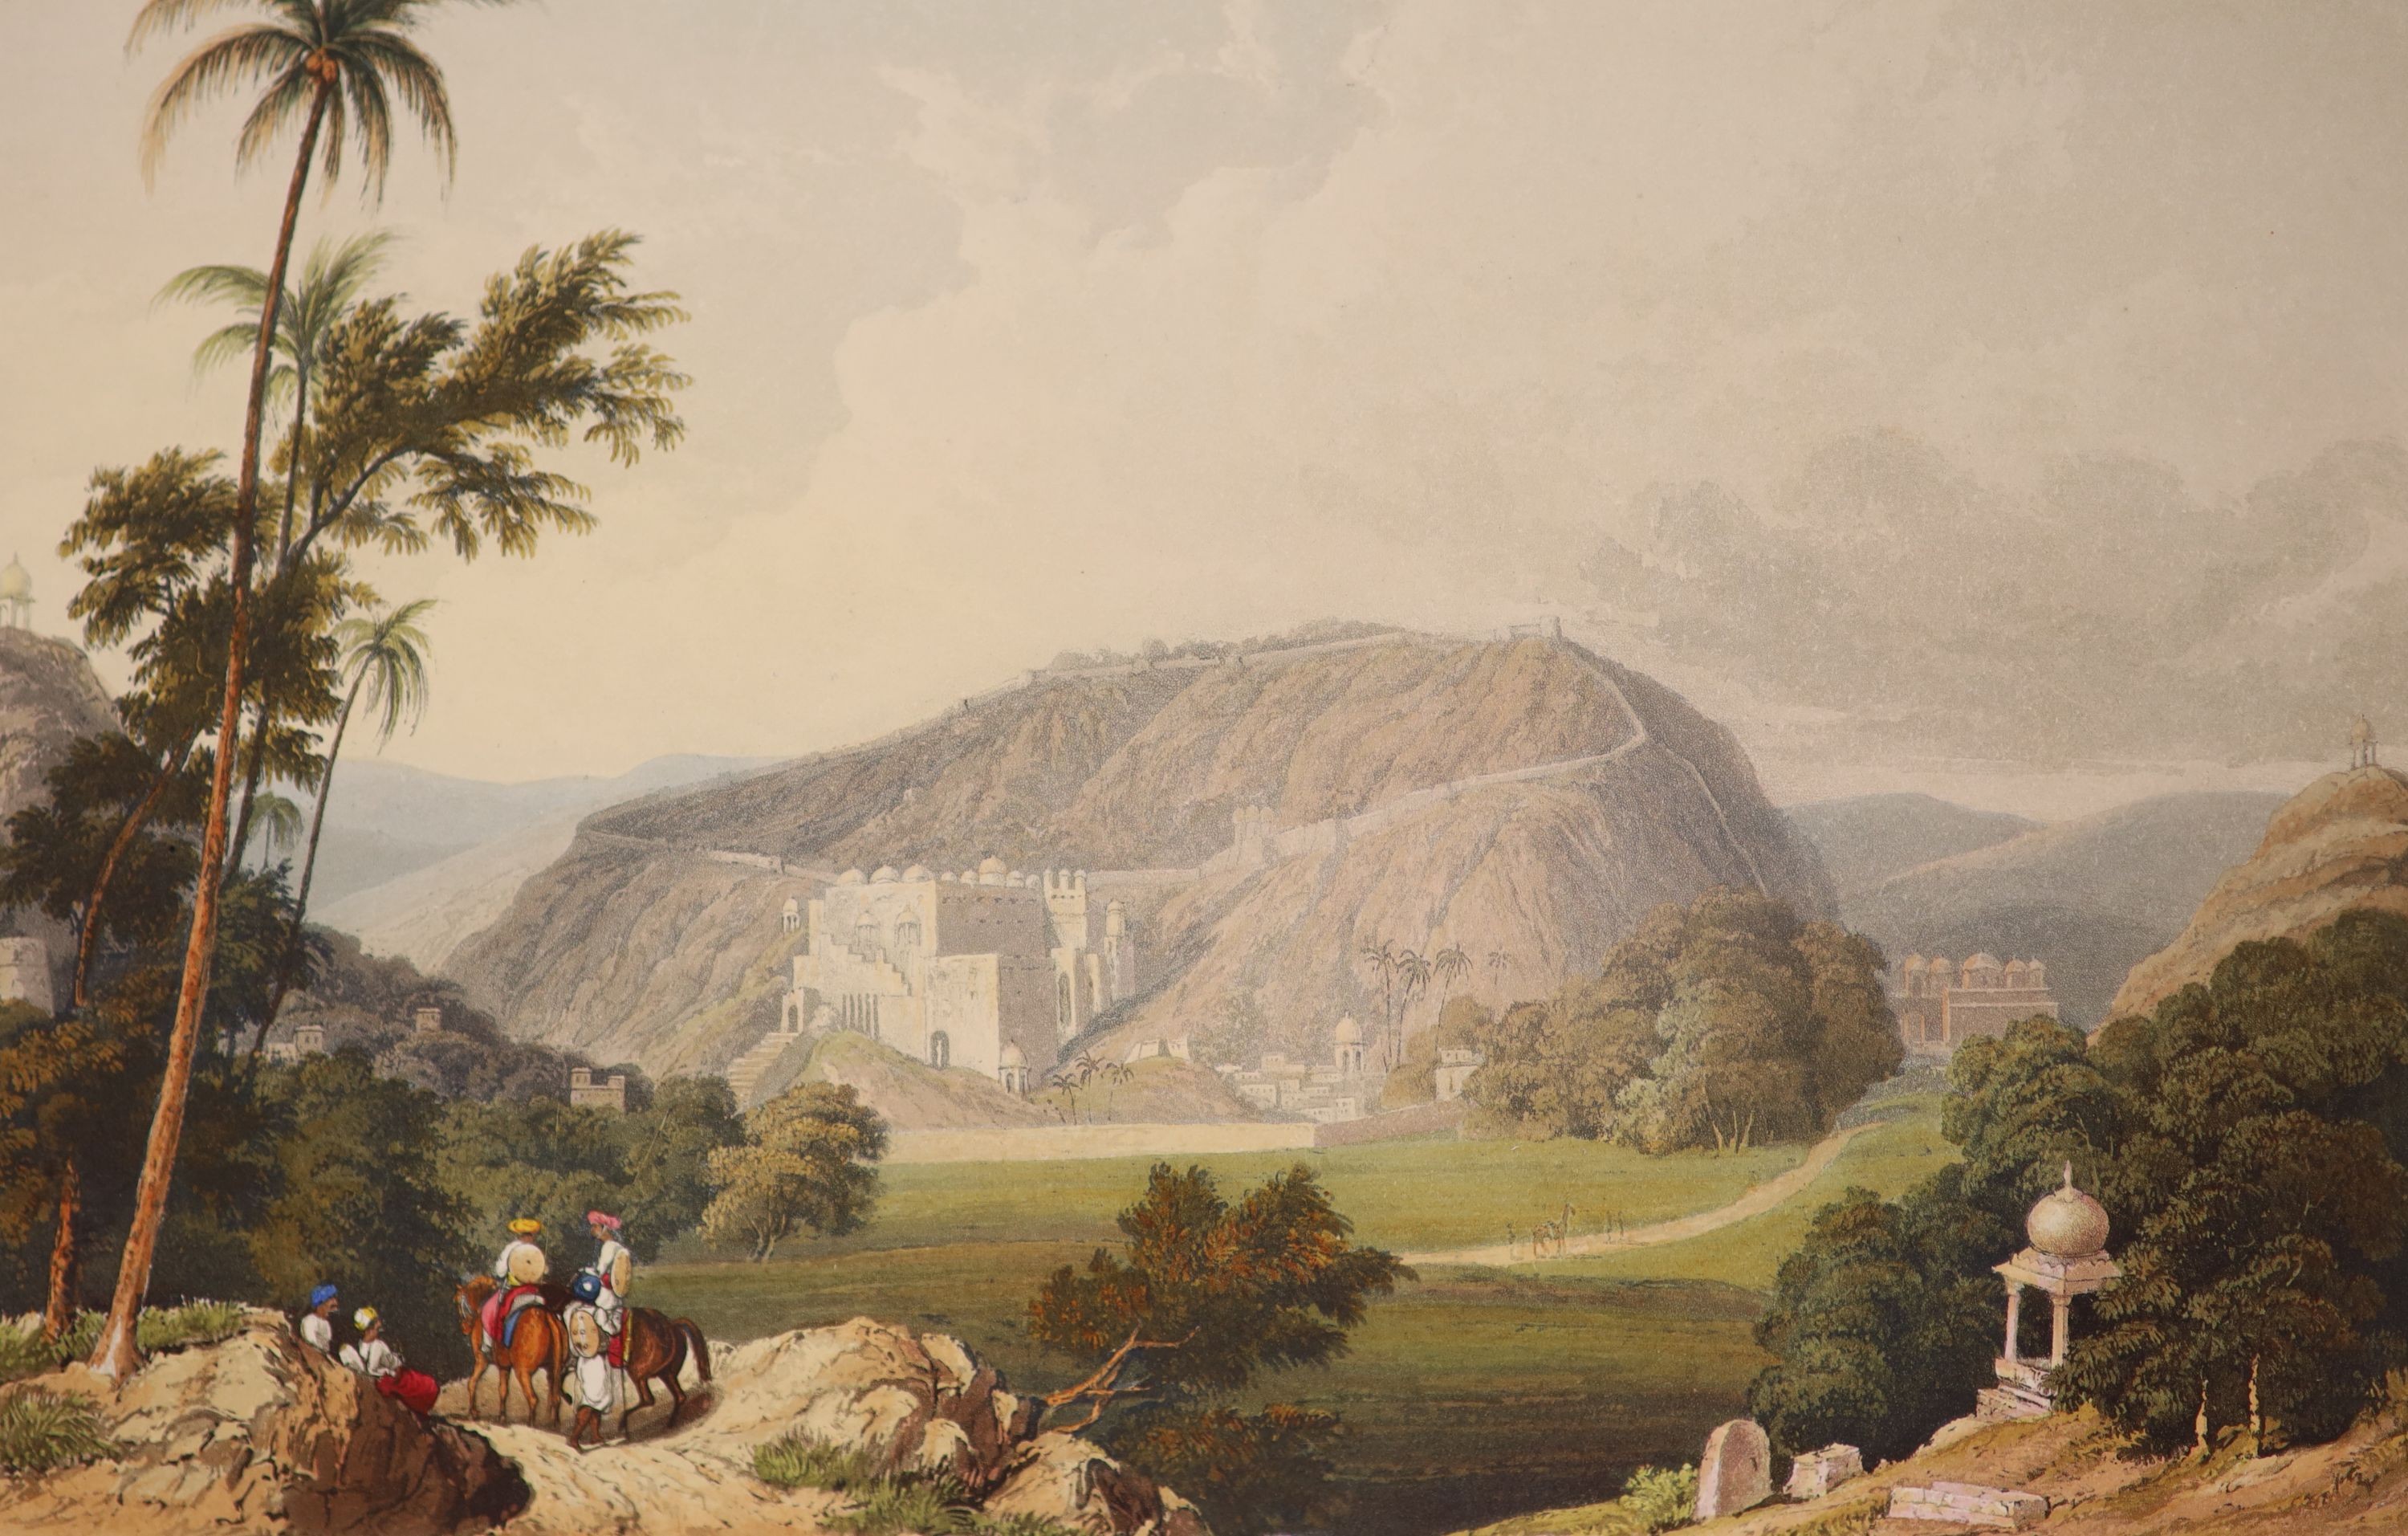 Grindlay, Captain Robert Melville - Scenery, Costumes and Architecture, Chiefly on the Western Side of India, large qto, half green morocco, hand-coloured engraved general title vignette and 36 hand-coloured plates after